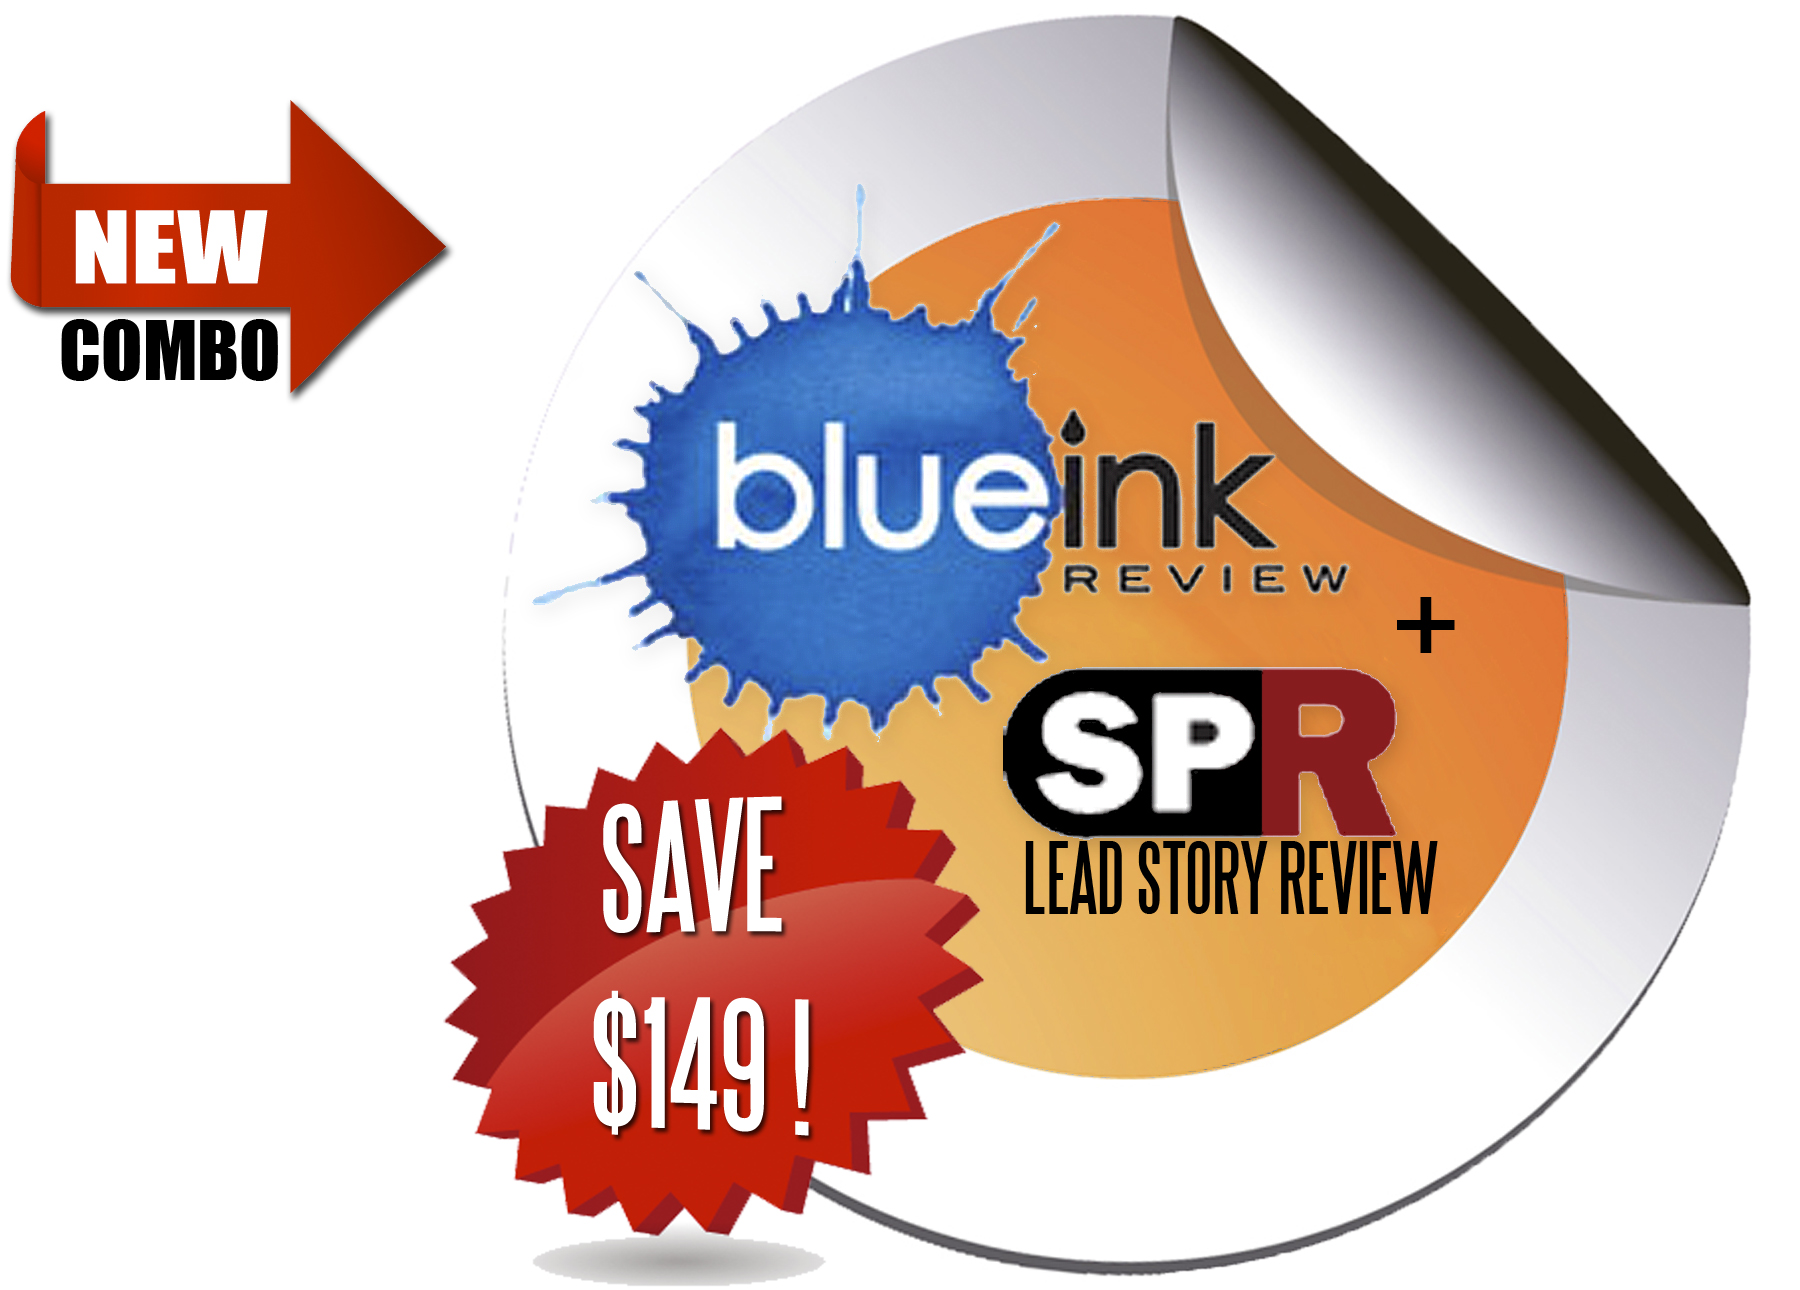 New Review Package Launched - BlueInk and SPR